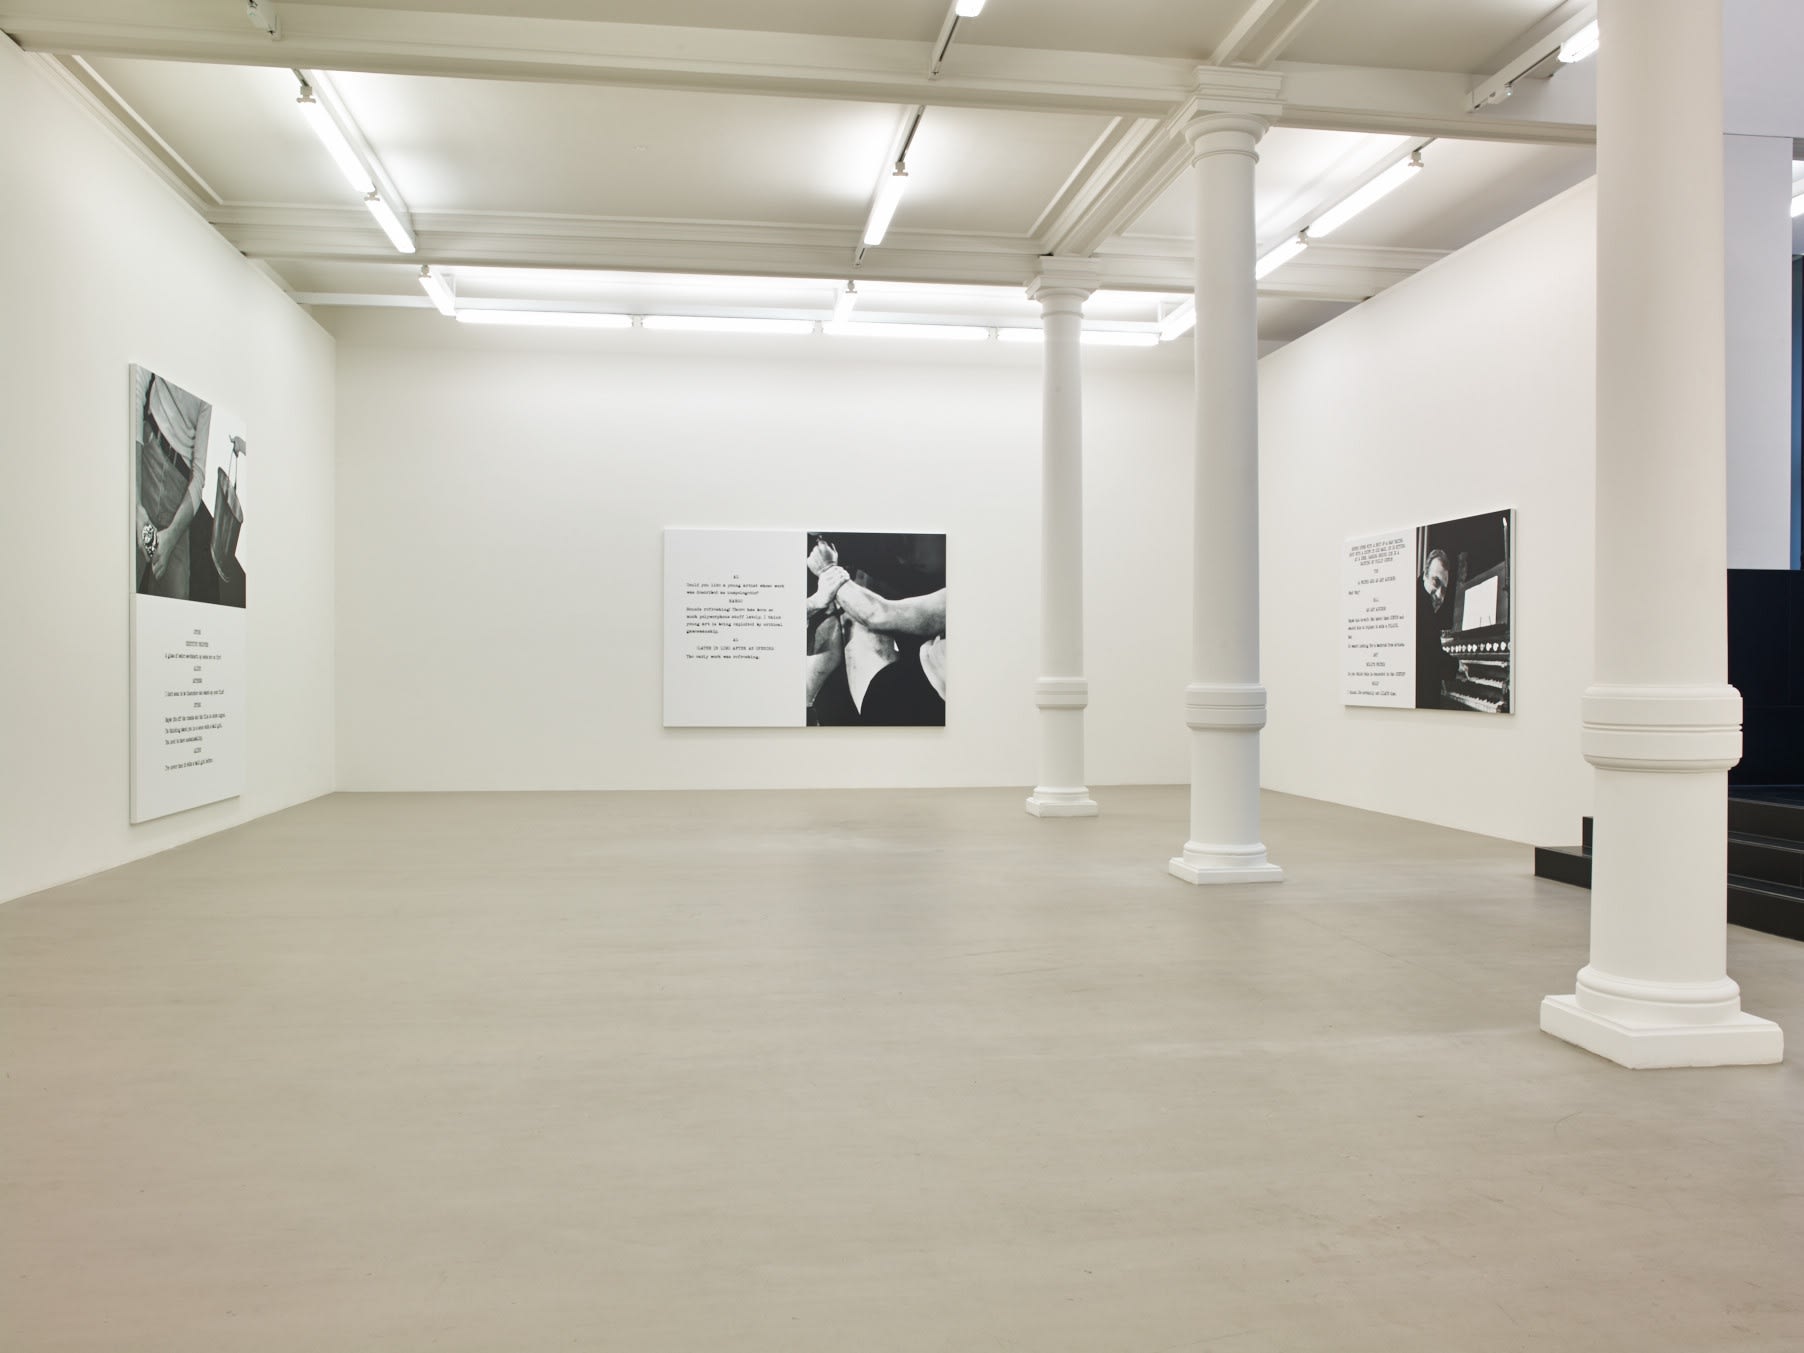 In a large white space with columns and a long skylight, 3 large paintings hang. Each are roughly half image and half text, which is in the format of a film script.